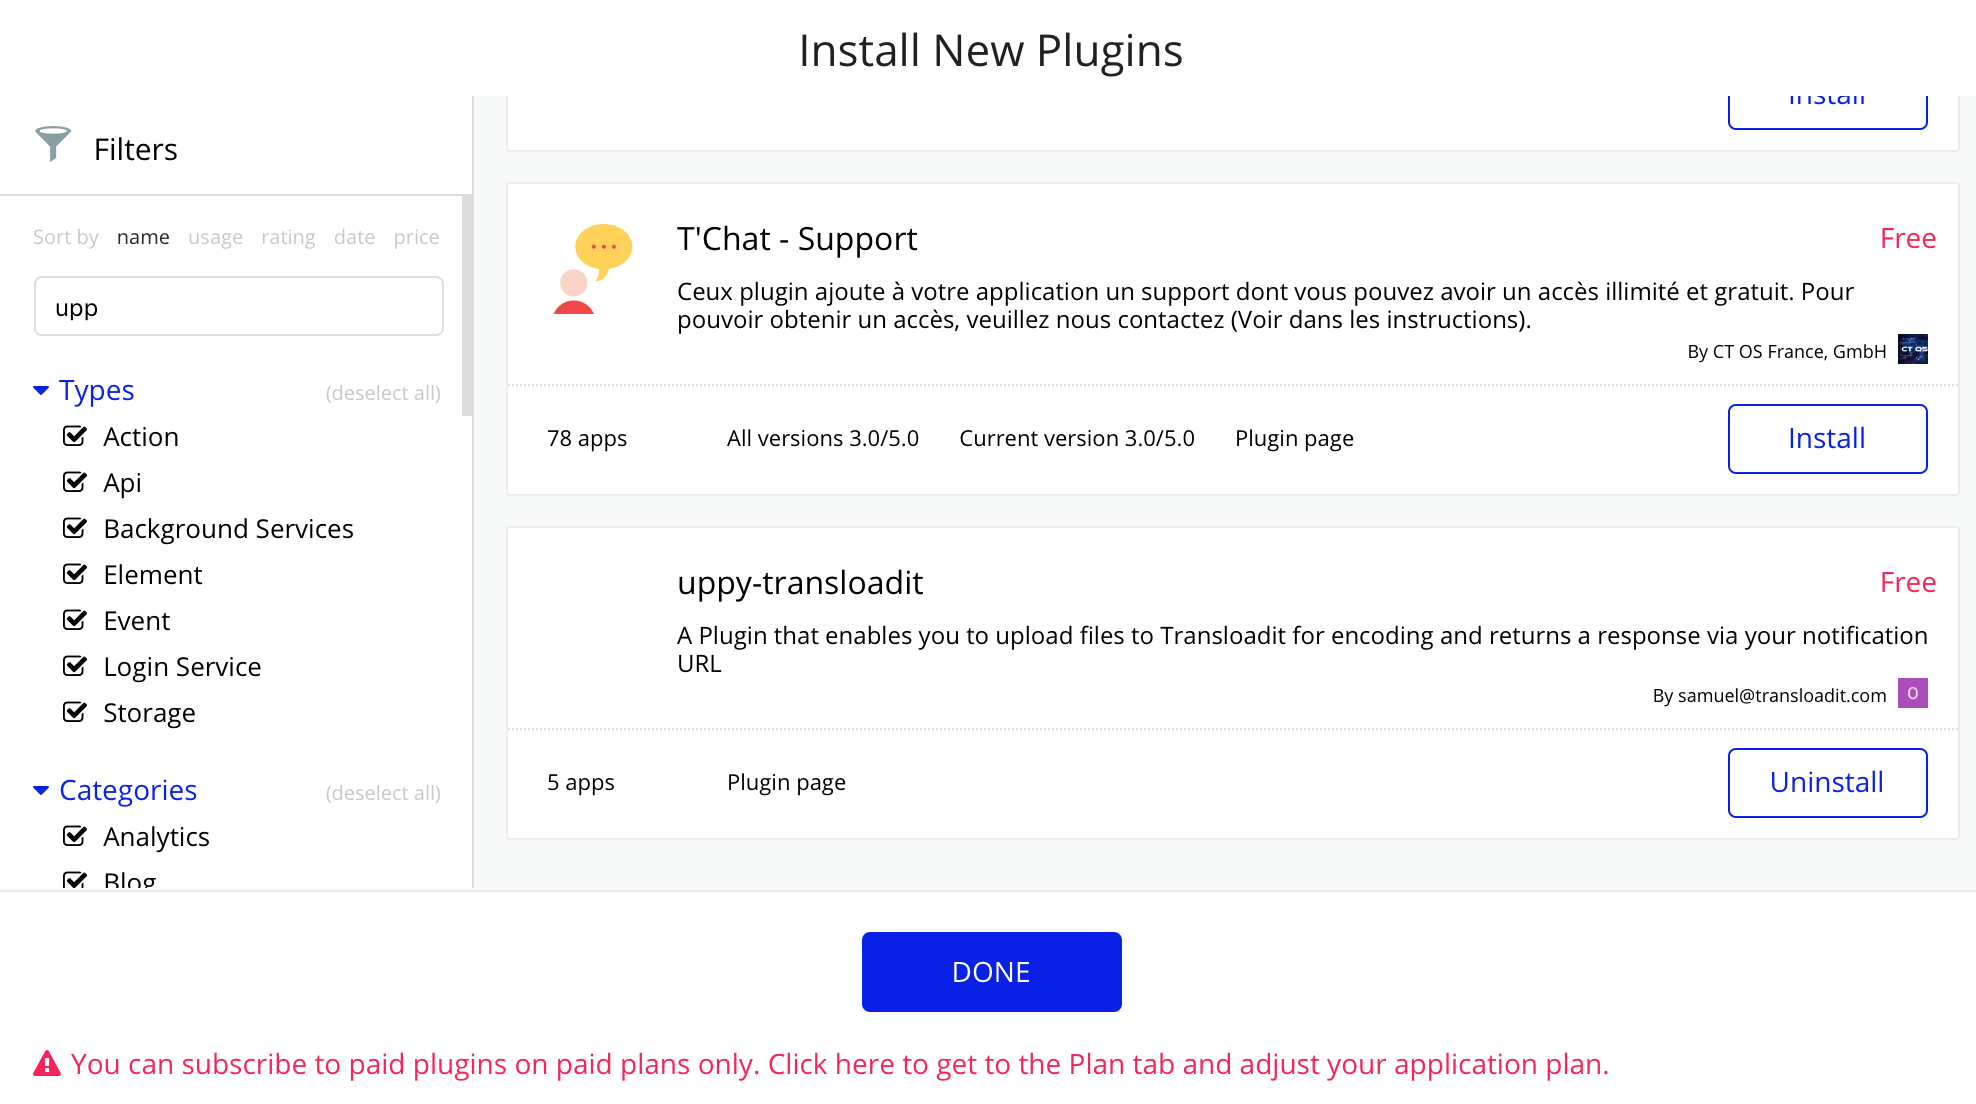 The Install New Plugins page on Bubble